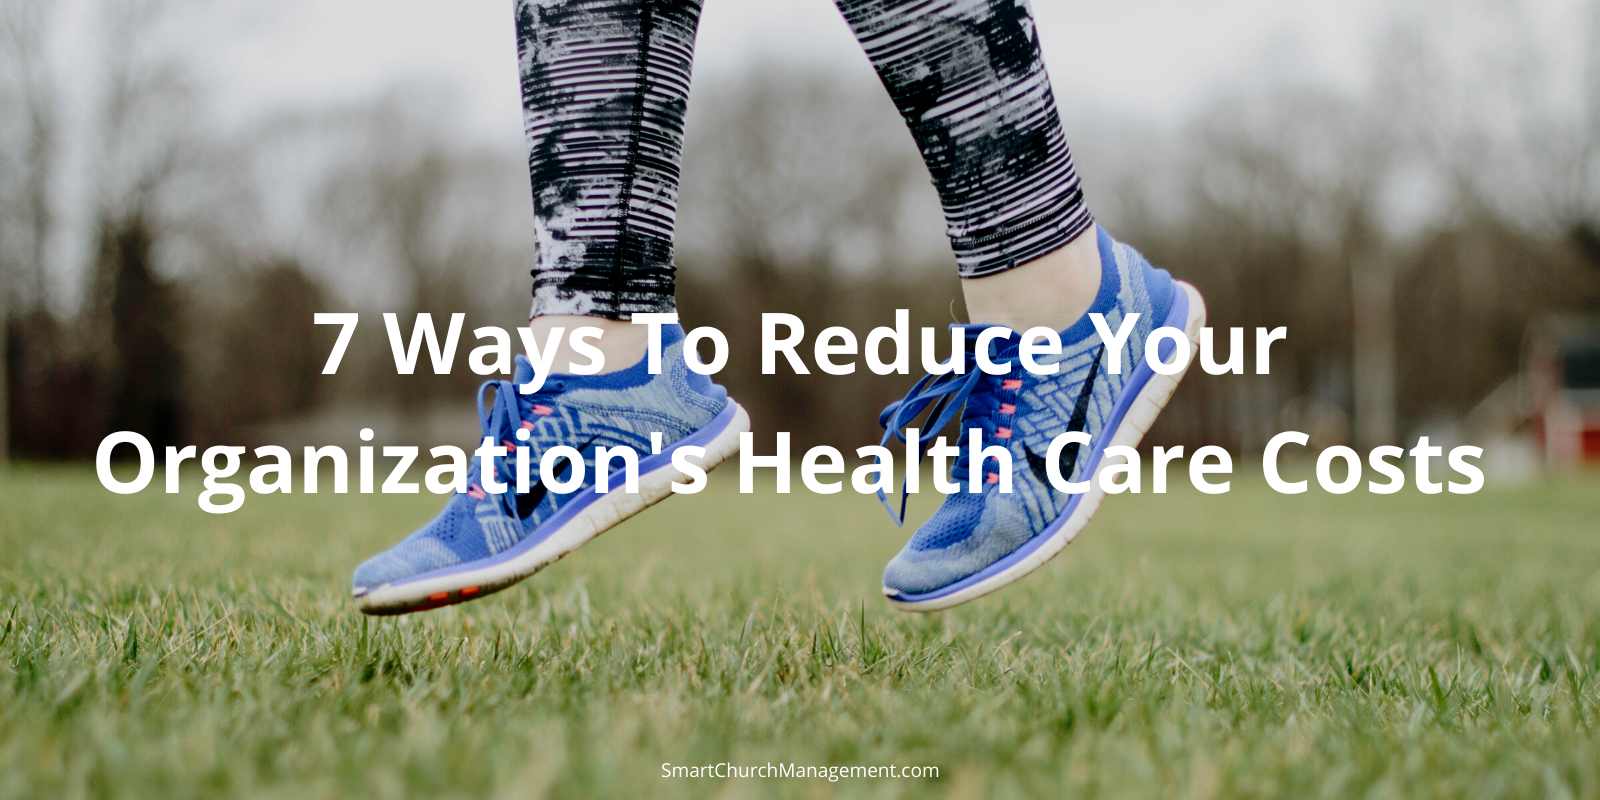 How to reduce healthcare costs